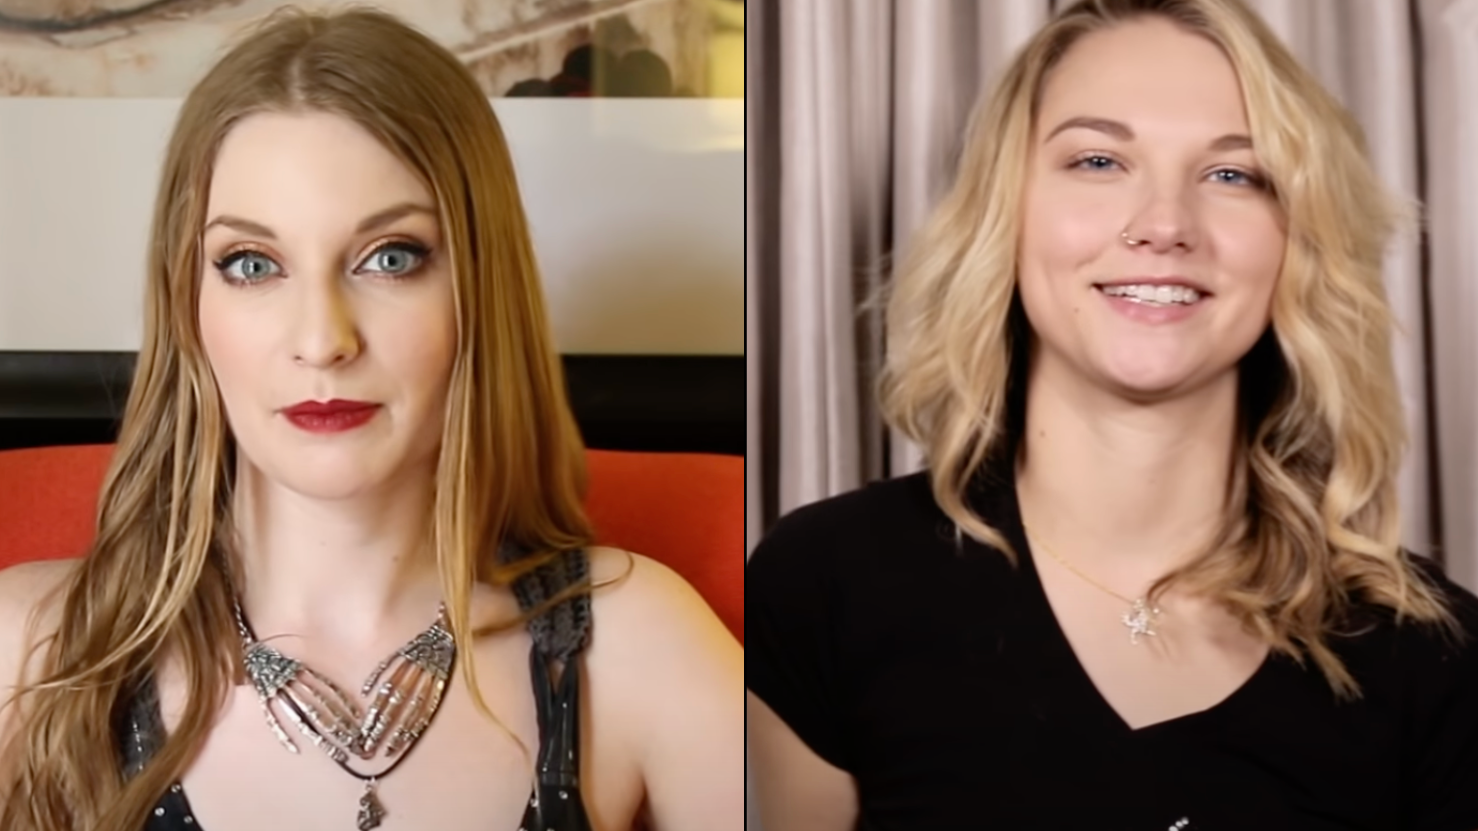 Porn stars open up on why they got into the industry and its not all about money pic